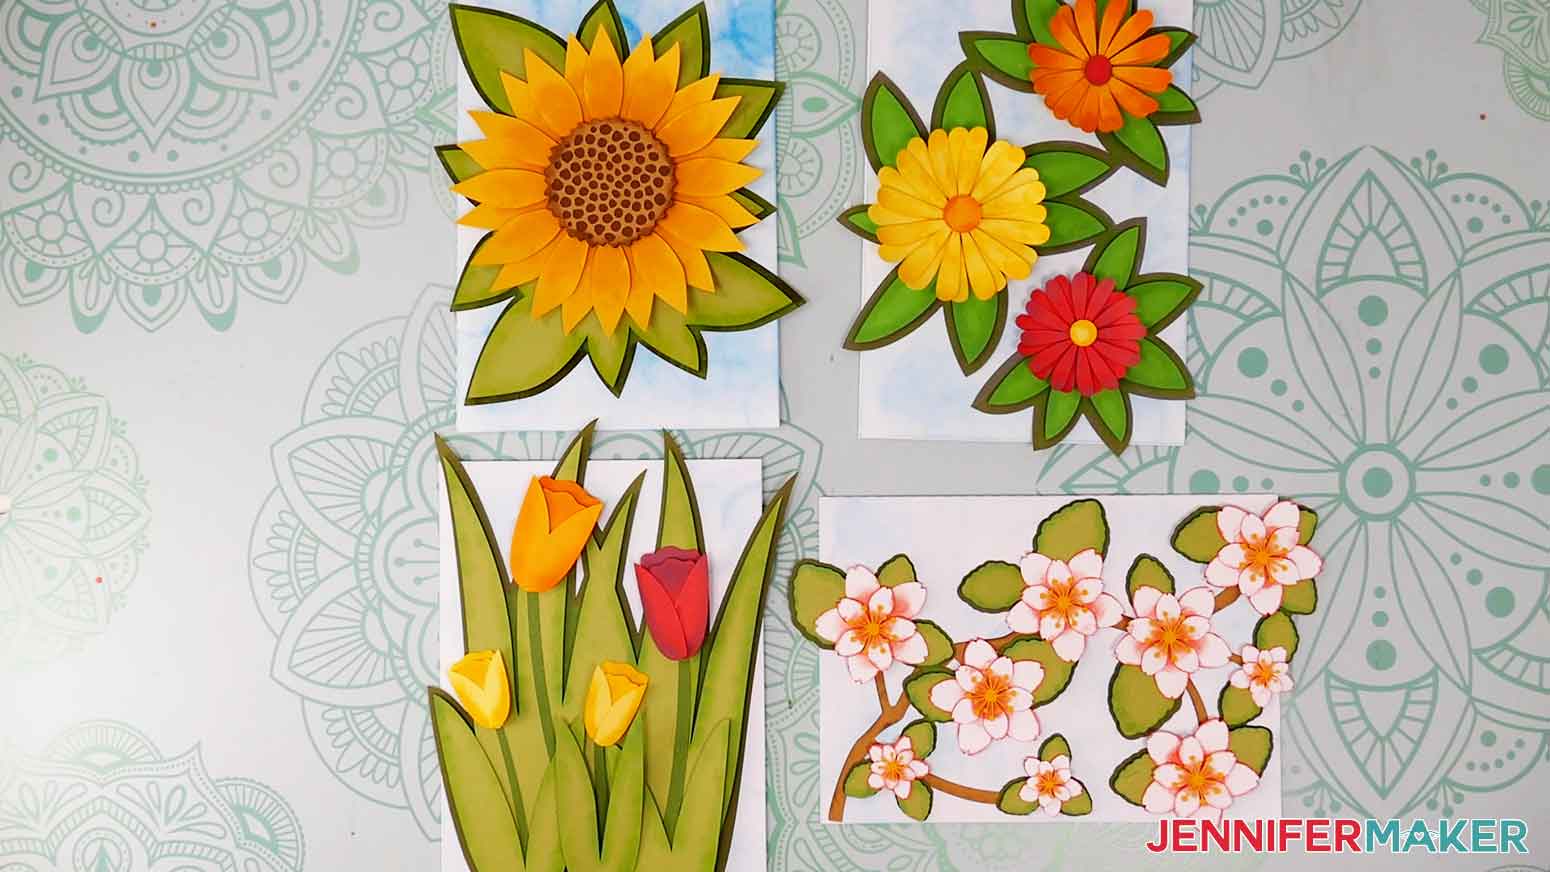 Final Ink Cardstock Edges cards on display with sunflower, daisy, tulip, and cherry blossom designs.